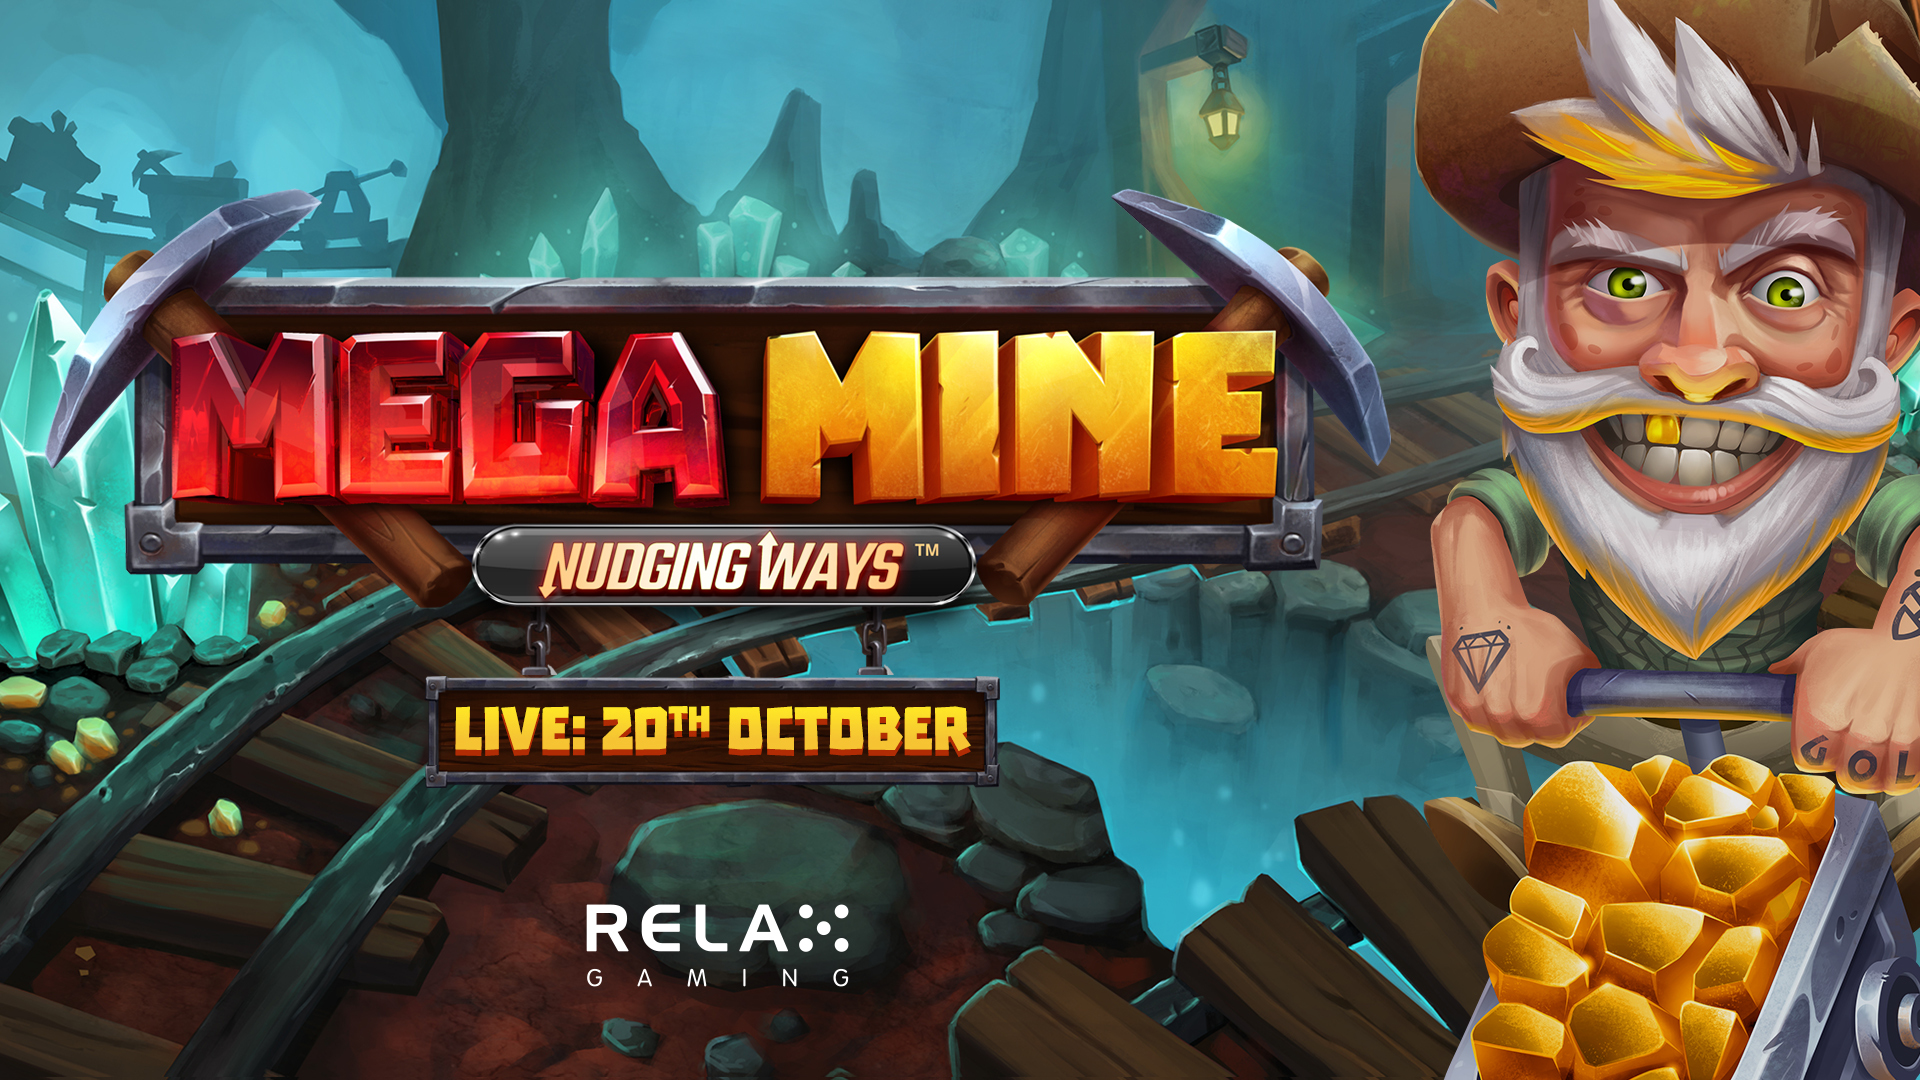 Relax Gaming strikes gold with new feature in Mega Mine: Nudging Ways